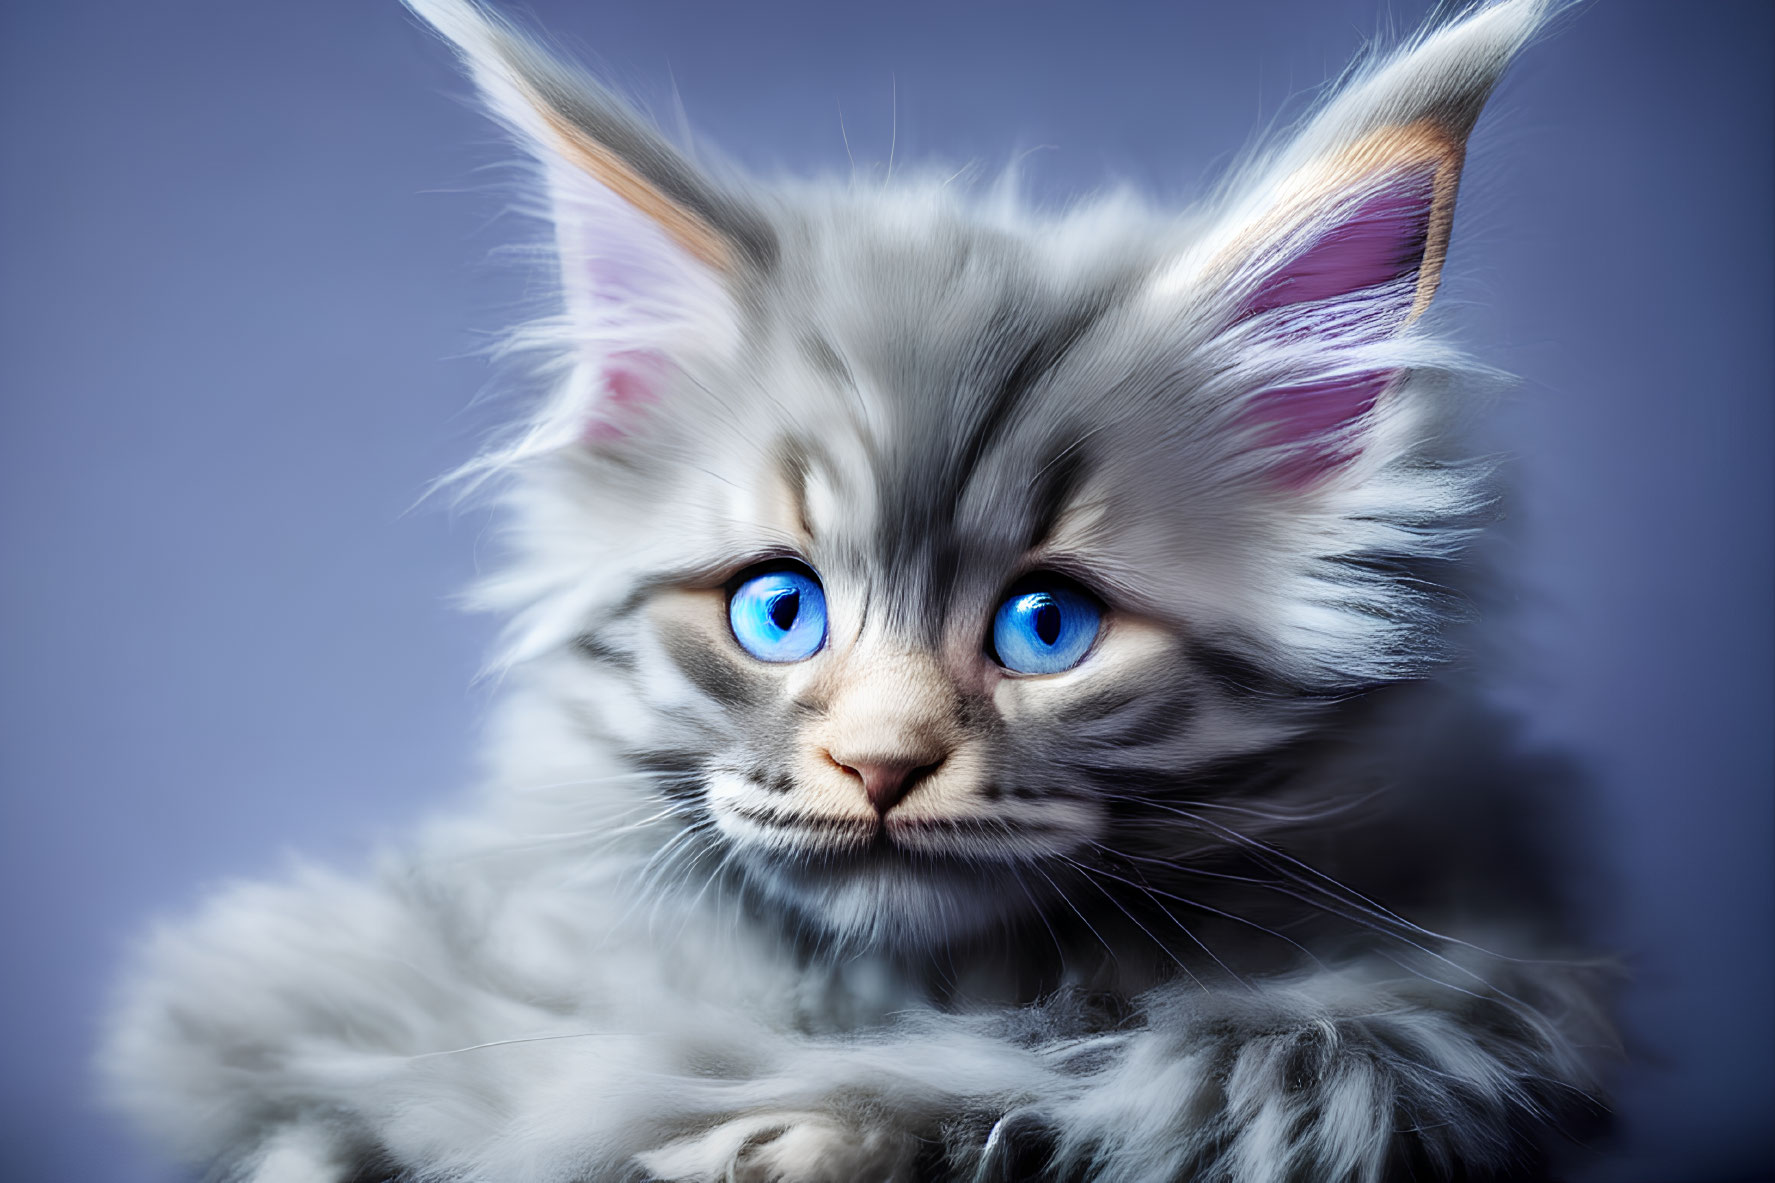 Adorable gray kitten with blue eyes and whiskers on blue backdrop